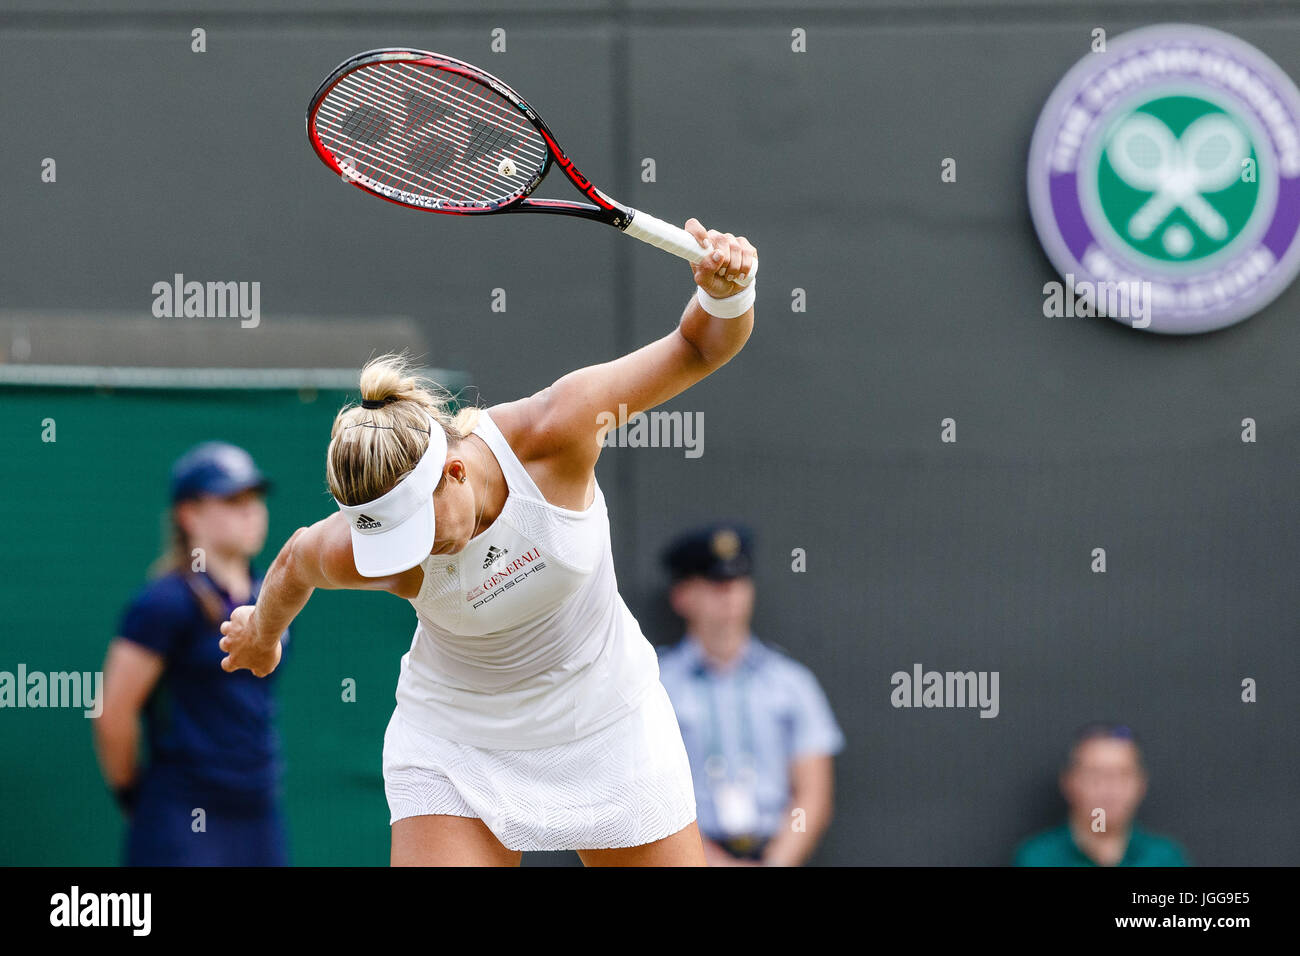 London, UK, 6th July 2017: German tennis player Angelique Kerber in action during day 4 at the Wimbledon Tennis Championships 2017 at the All England Lawn Tennis and Croquet Club in London. Credit: Frank Molter/Alamy Live News Stock Photo